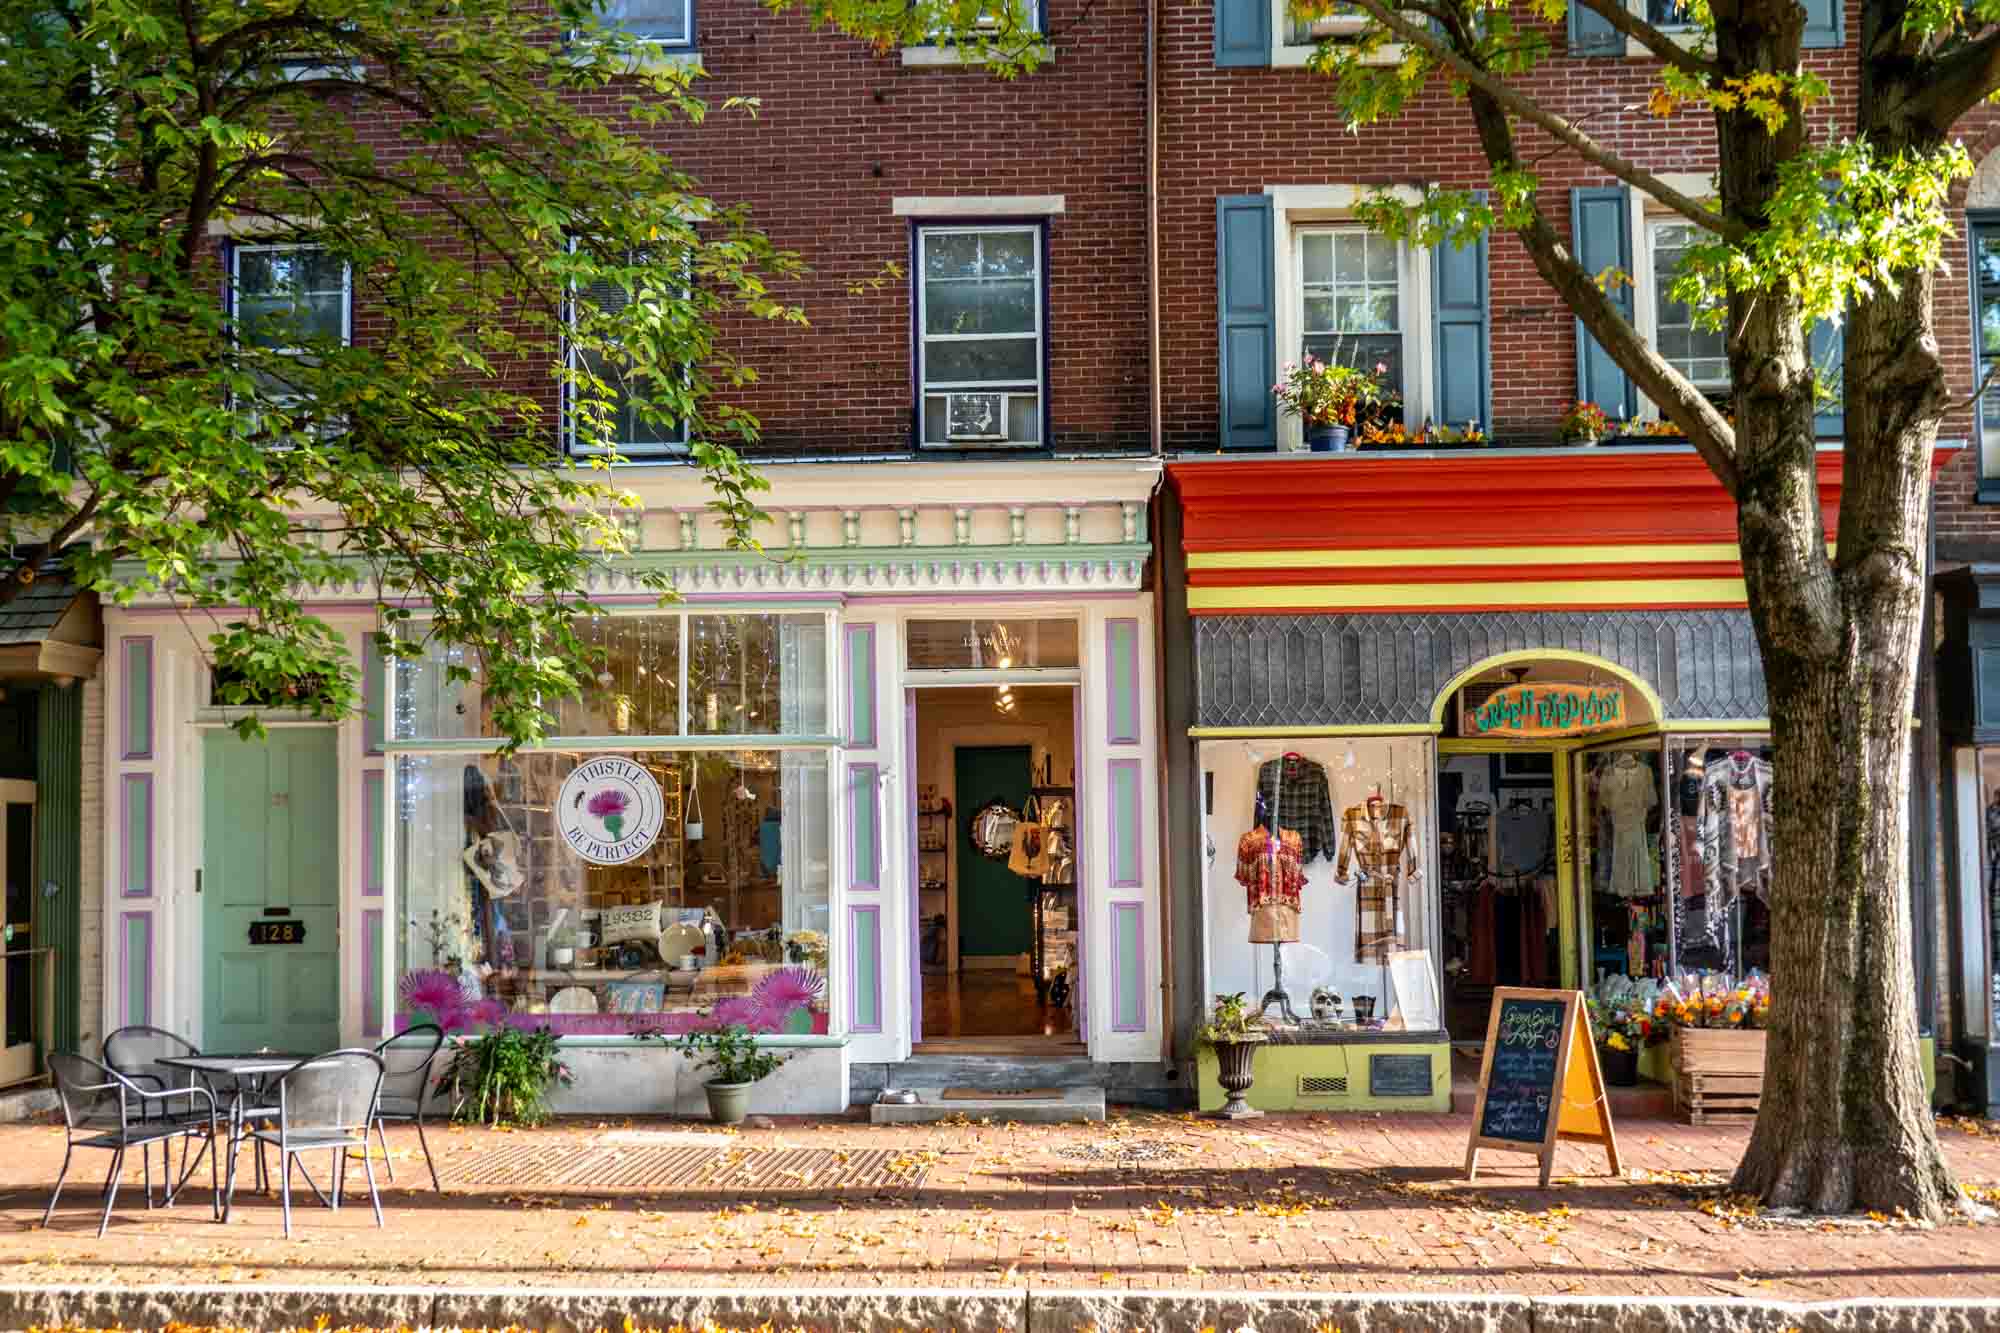 Two colorful storefronts on a tree-lined street